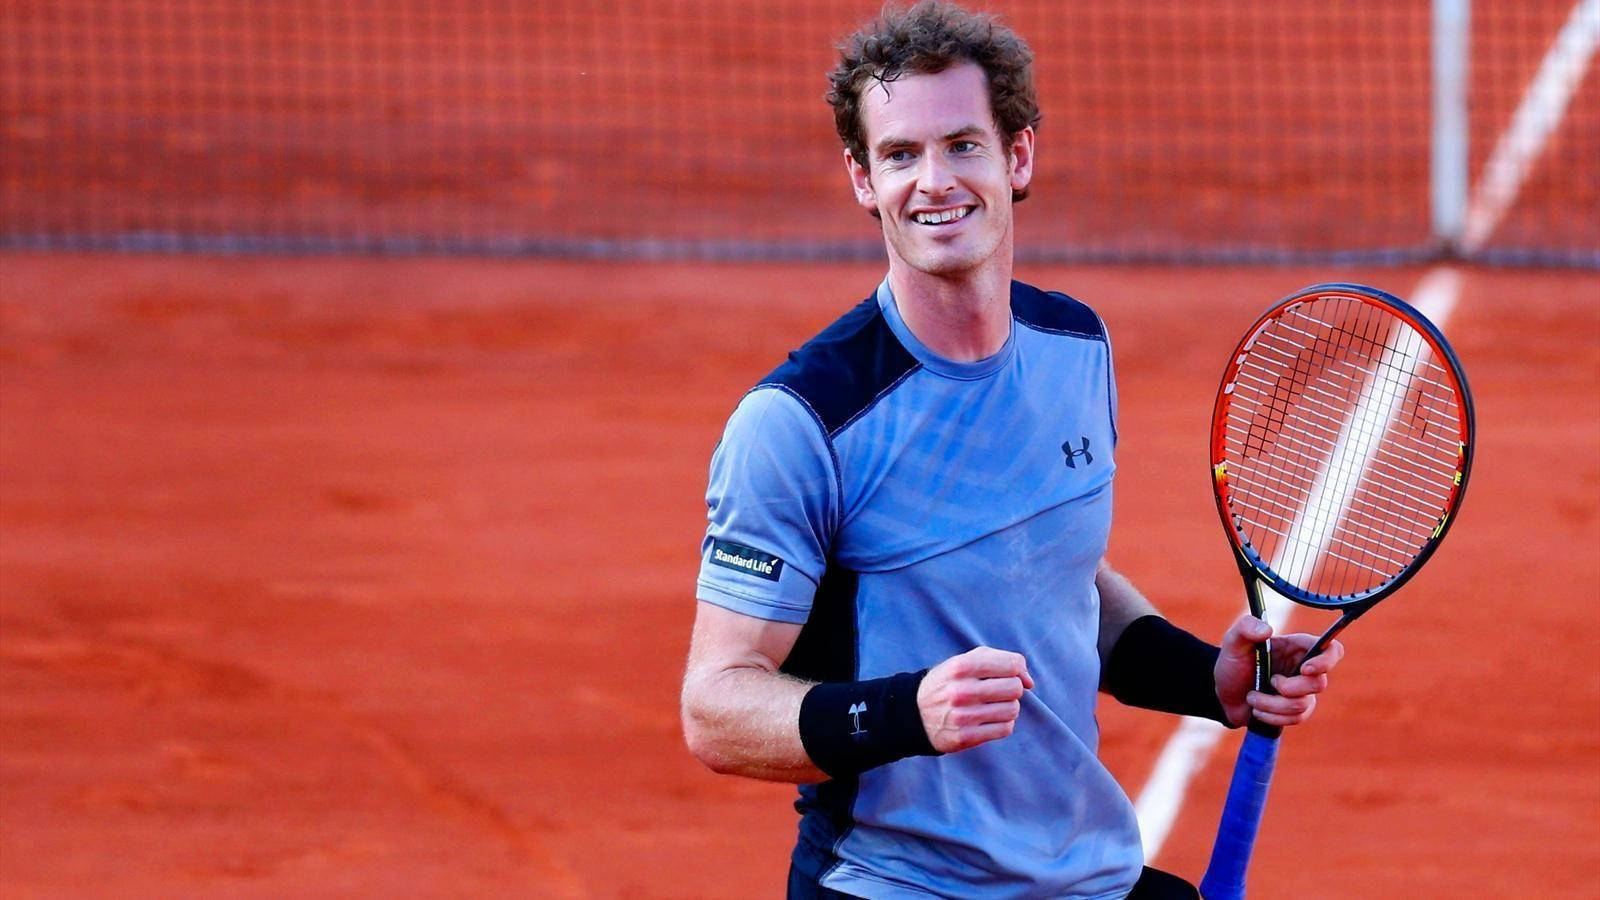 Champion Smile - Andy Murray With His Tennis Racket